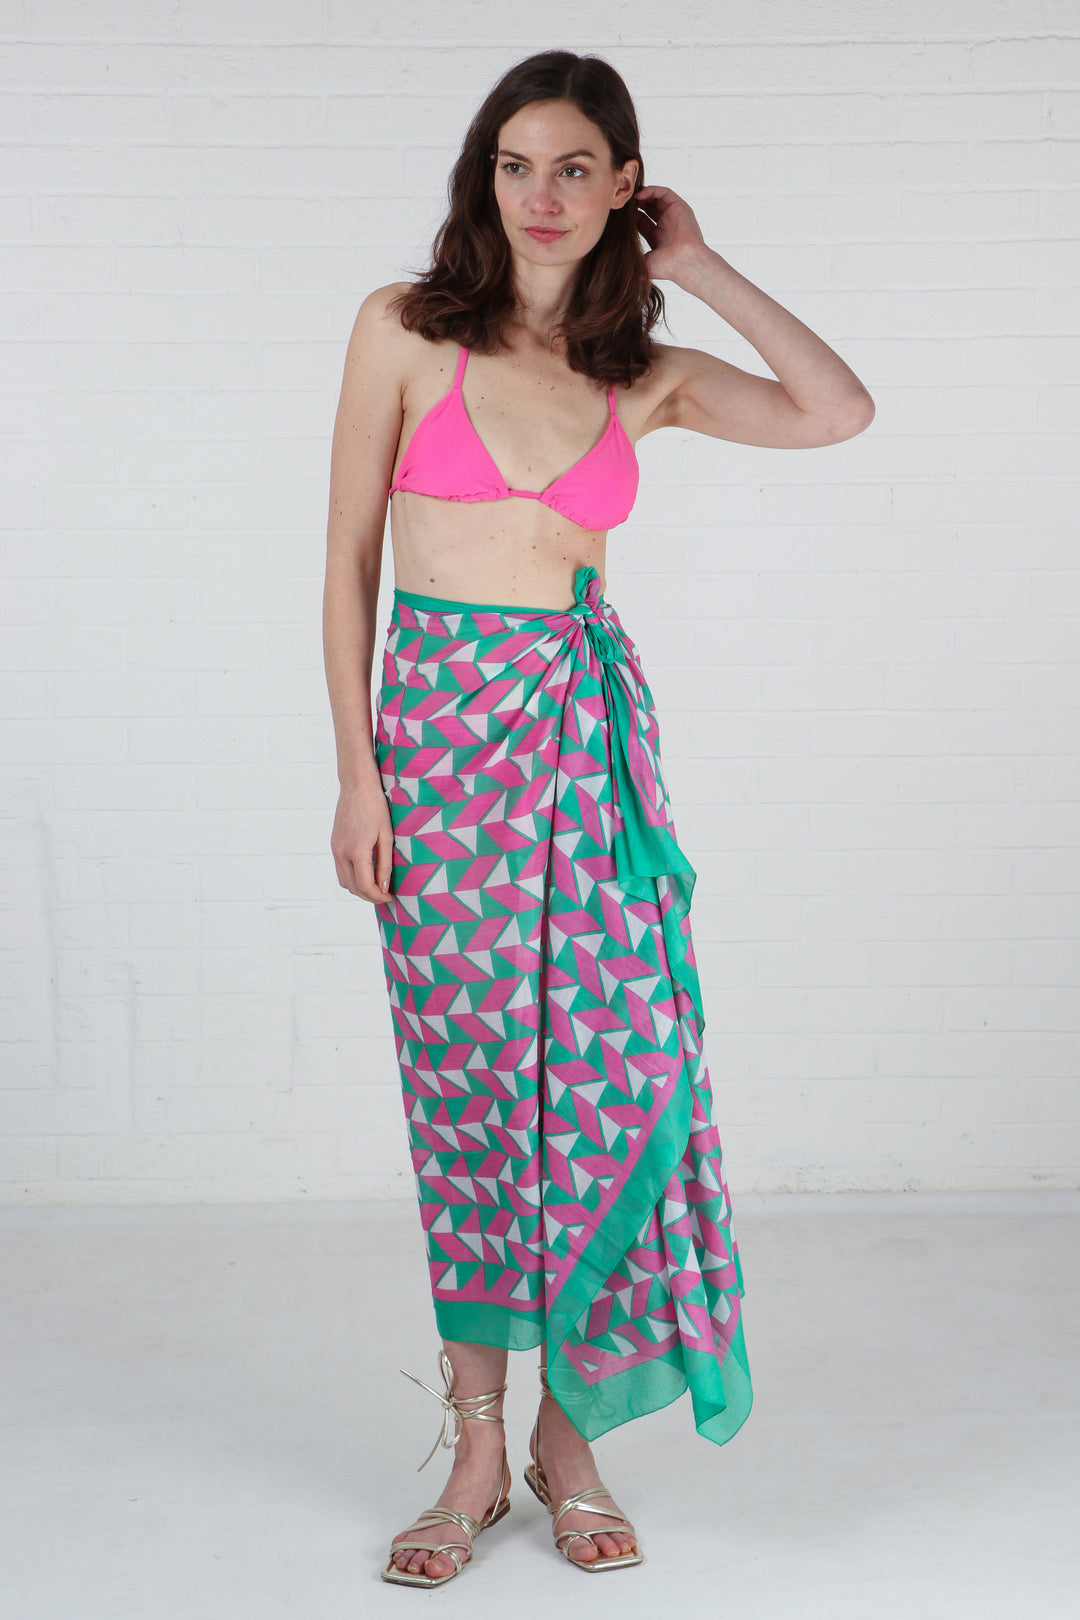 pink and green geometric pattern scarf being worn as a beach cover up